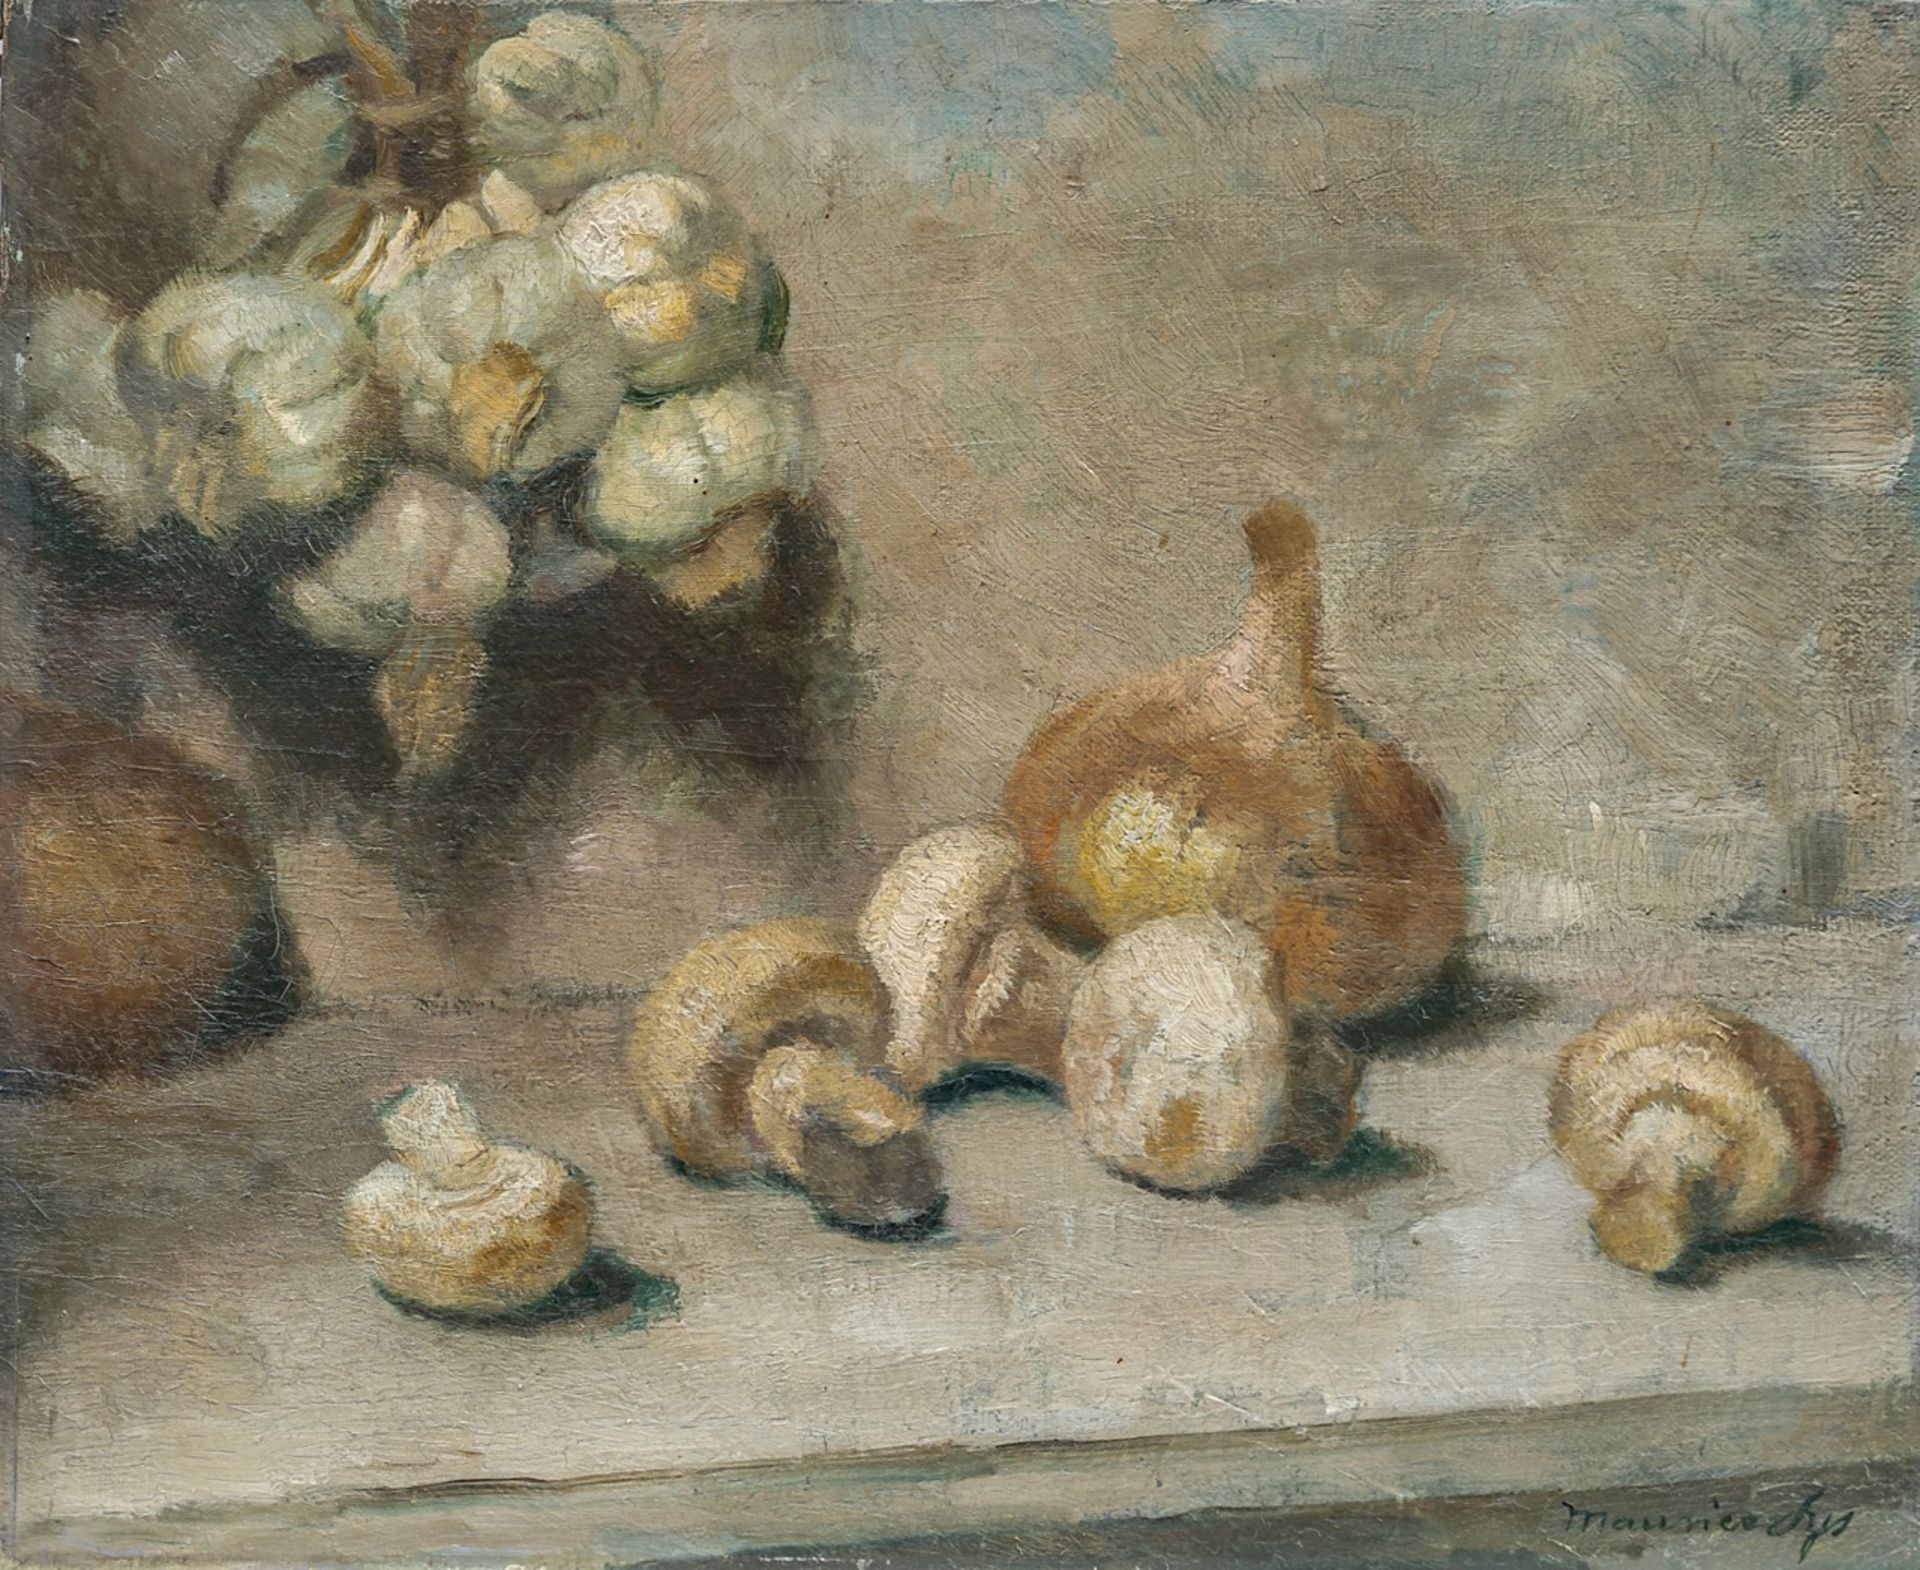 Maurice Sijs (1880-1972), still life with garlic, mushrooms and an onion, oil on canvas 36 x 43 cm.